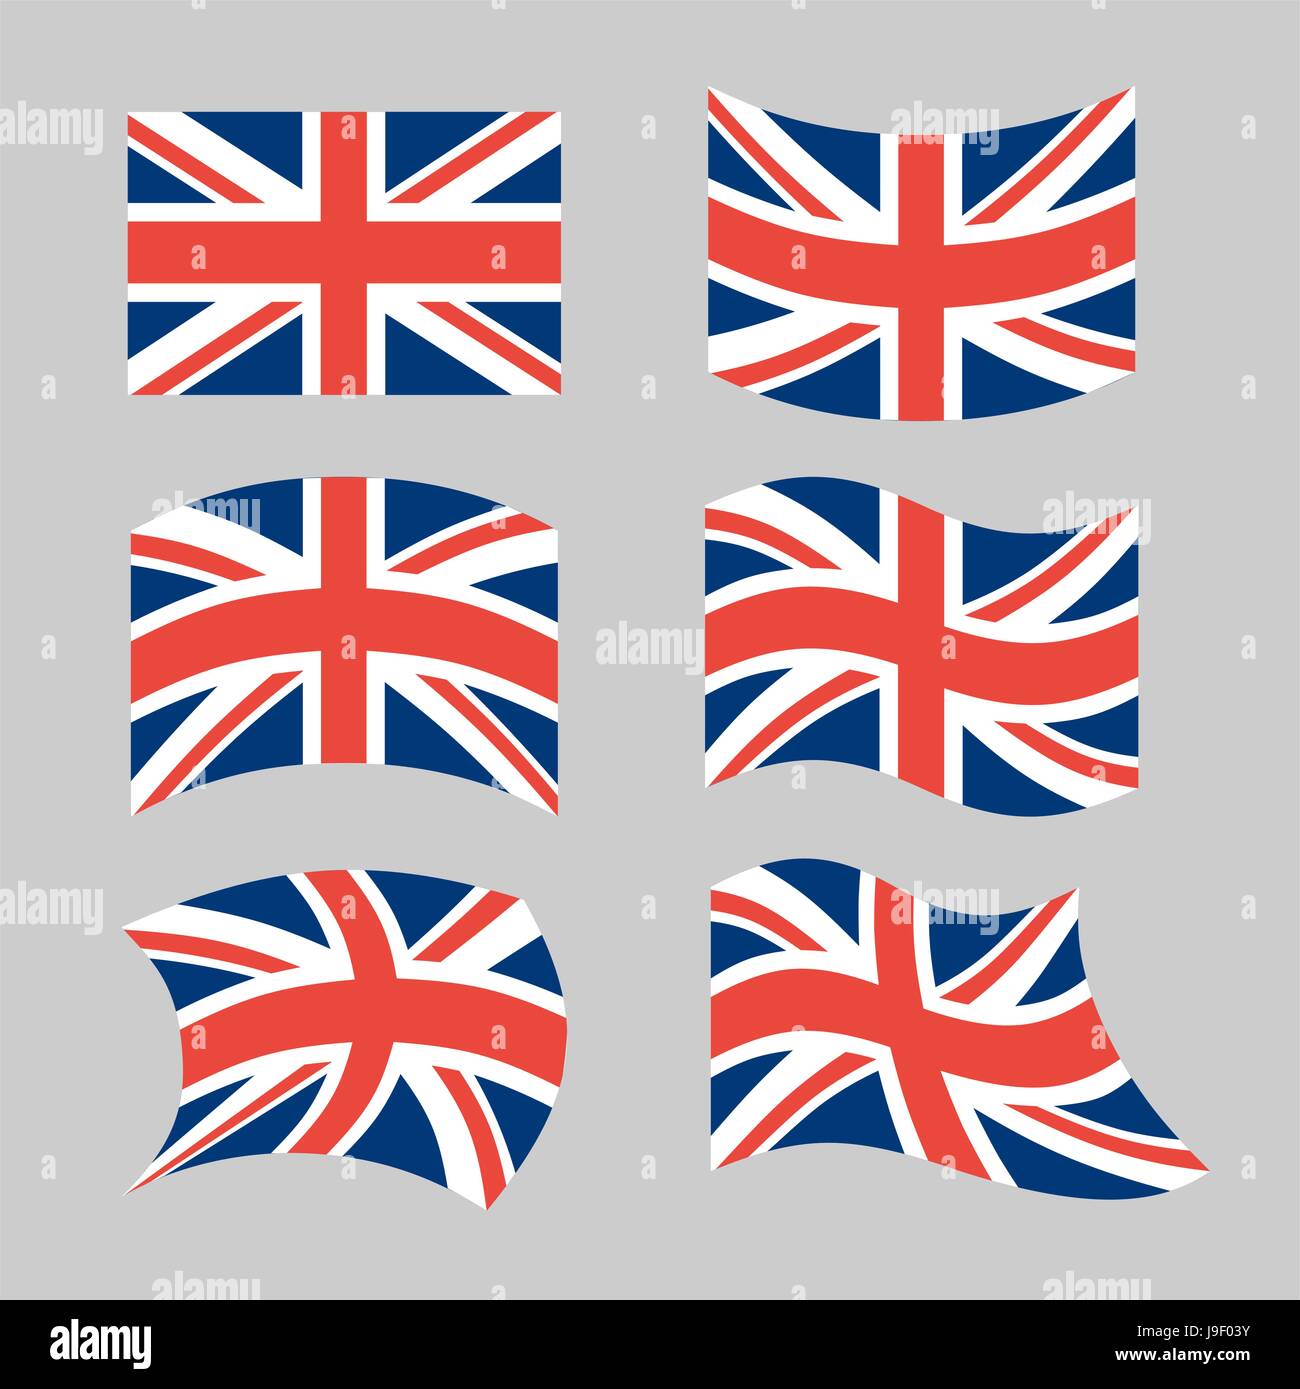 Great Britain Flag. Set national flag of British state. State symbols of Great Britain and Northern Ireland, United Kingdom Stock Vector